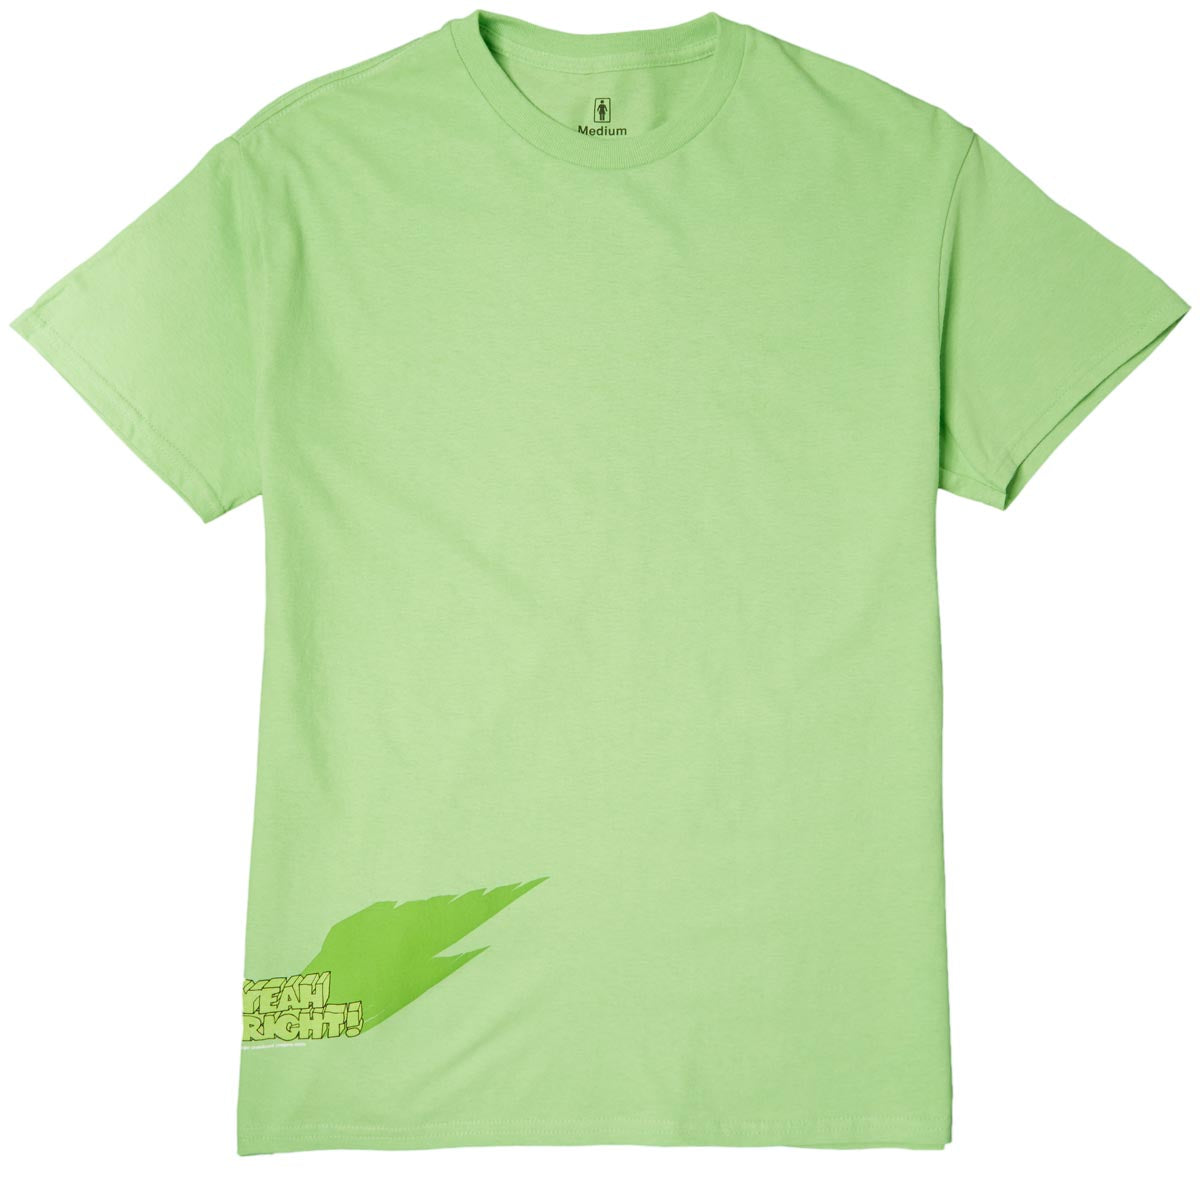 Girl Yeah Right Shadow T-Shirt - Lime Green image 1